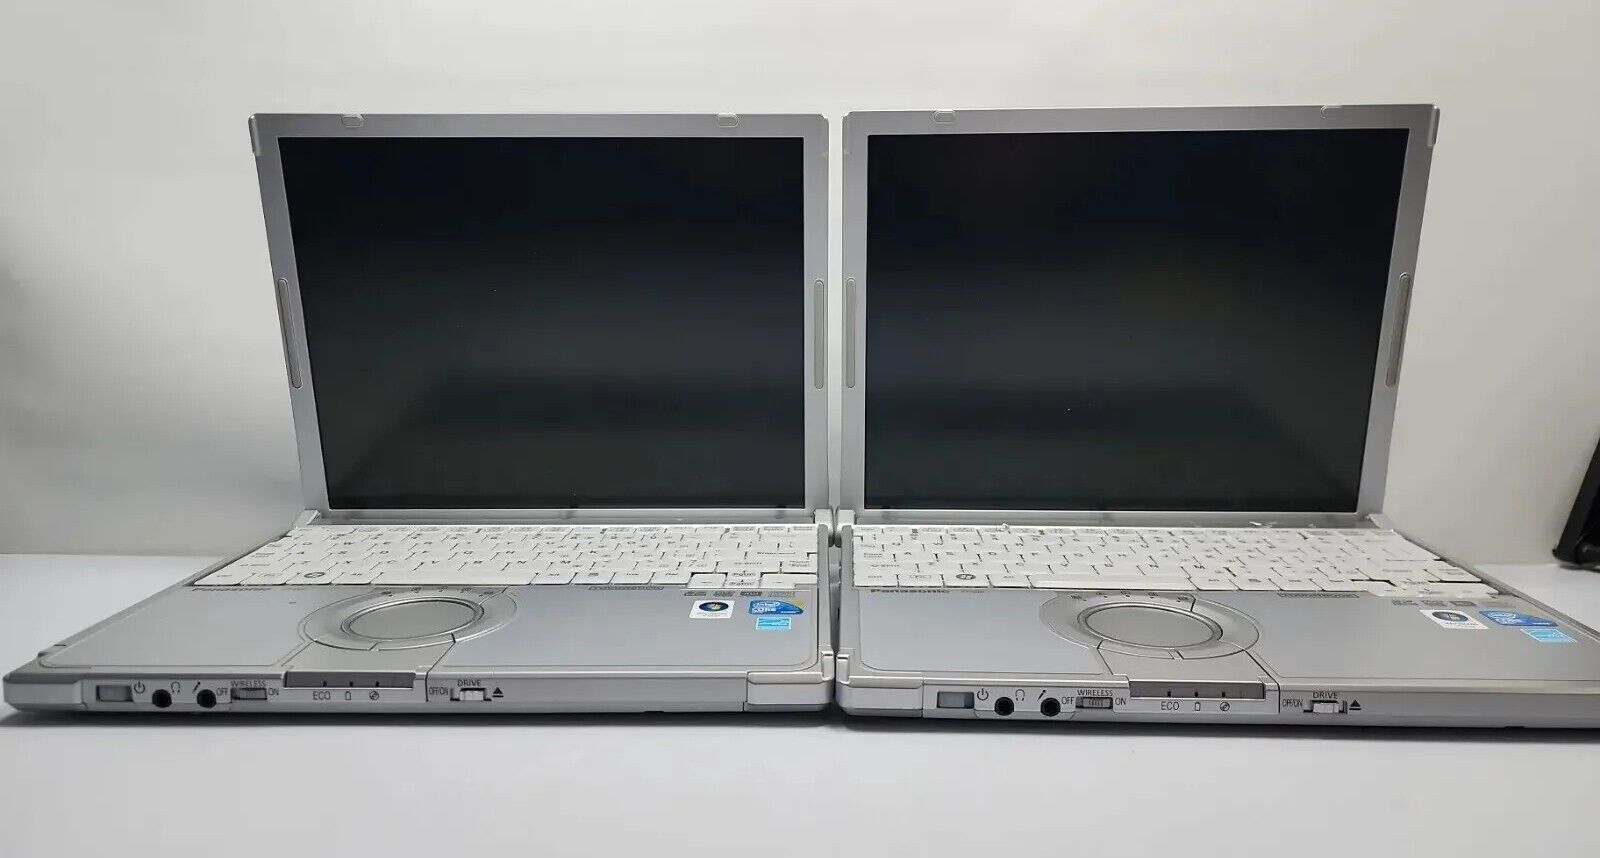 LOT OF 2 PANASONIC Toughbook CF-W8 Core 2 duo UNTESTED AS IS LAPTOP 